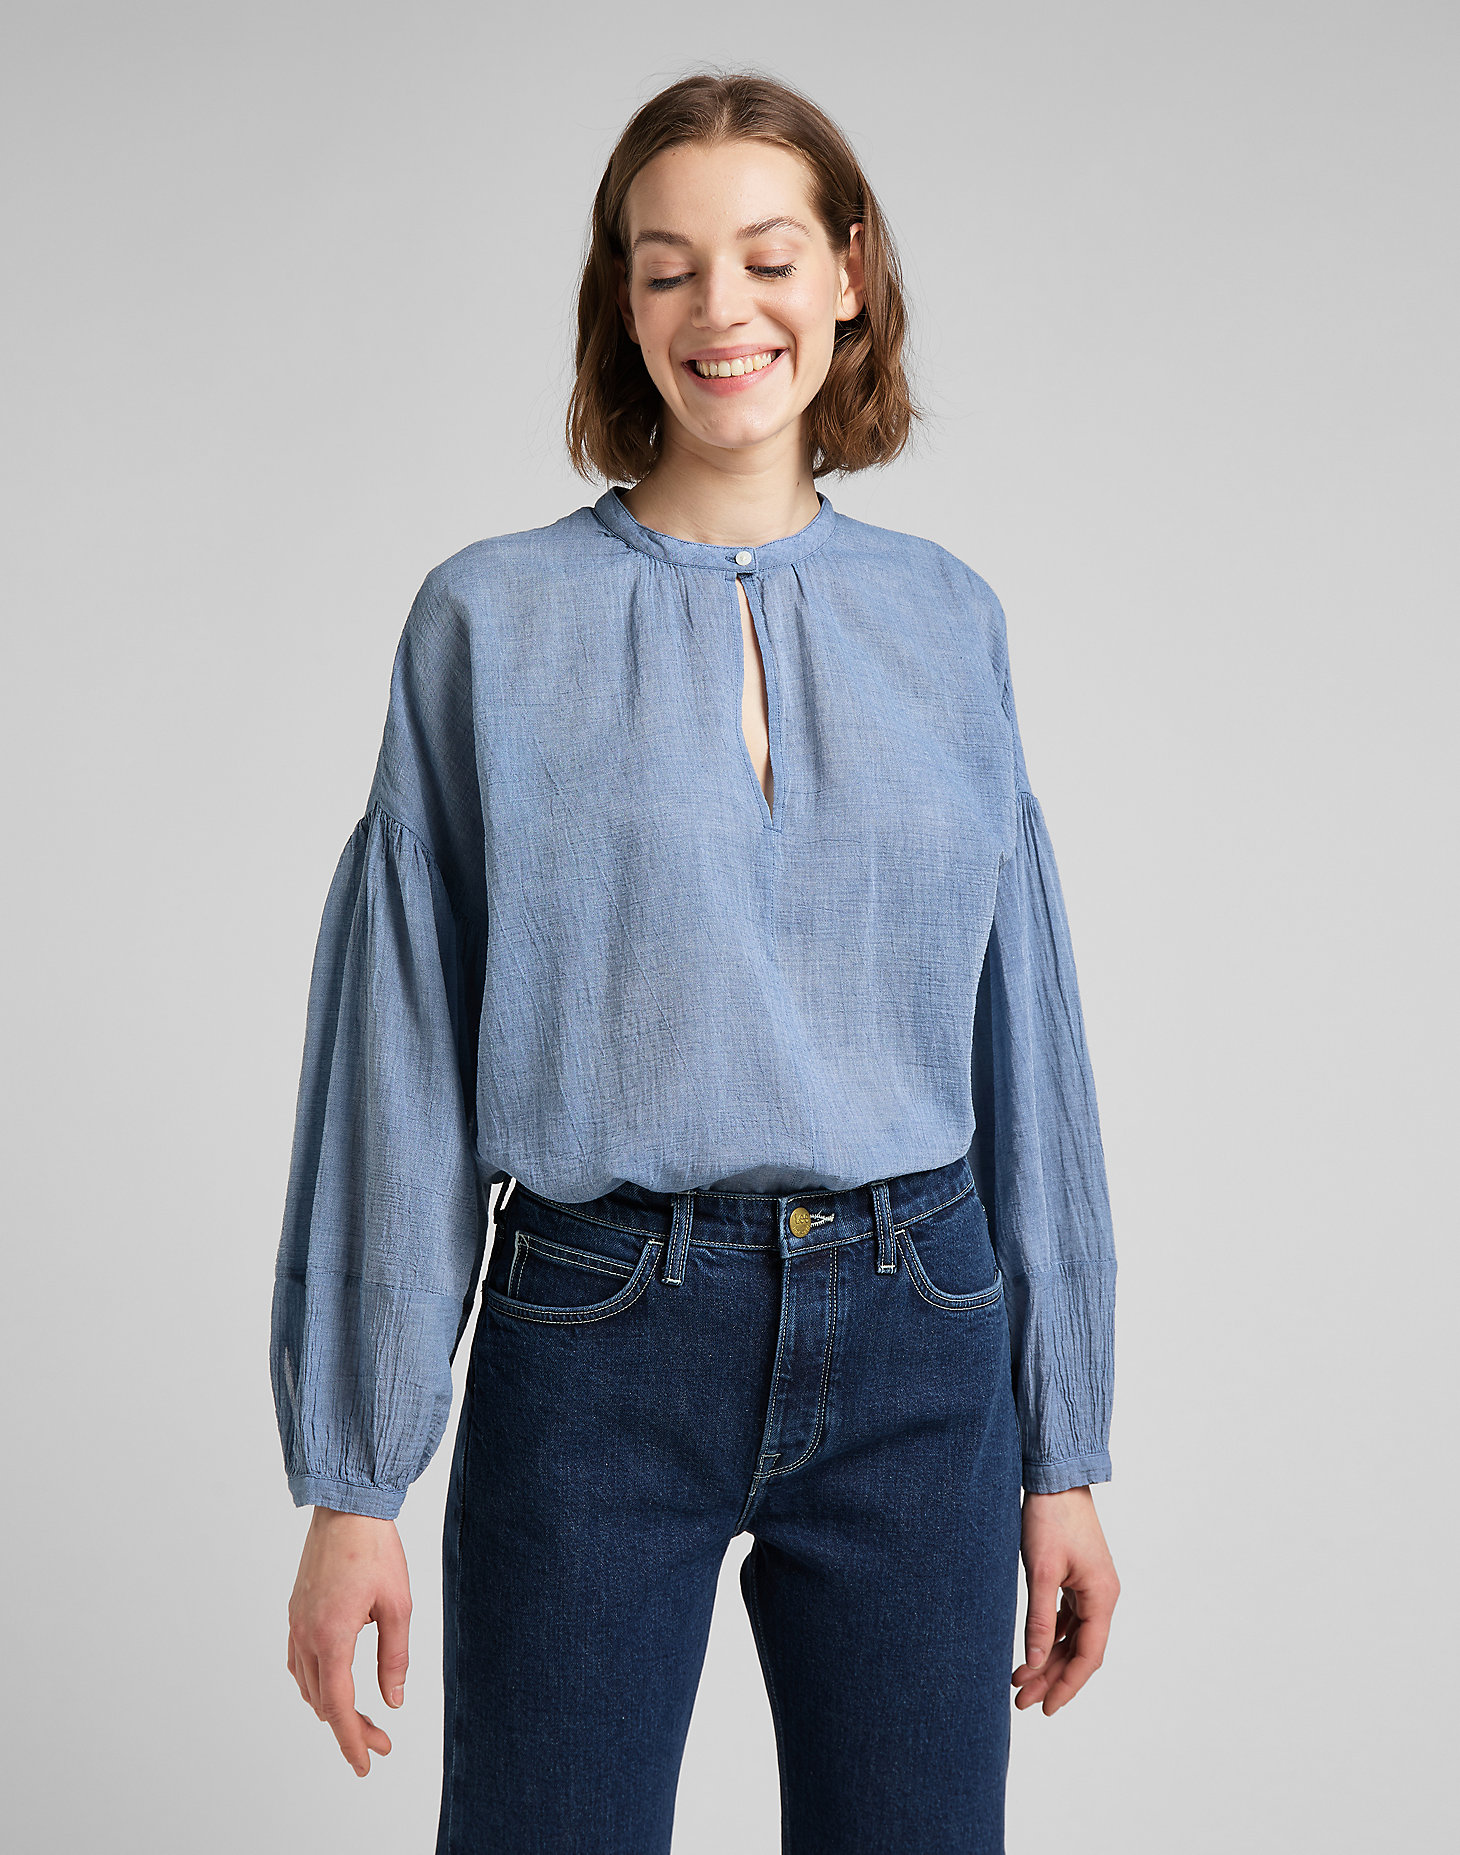 Relaxed Blouse in Arctic Ice main view